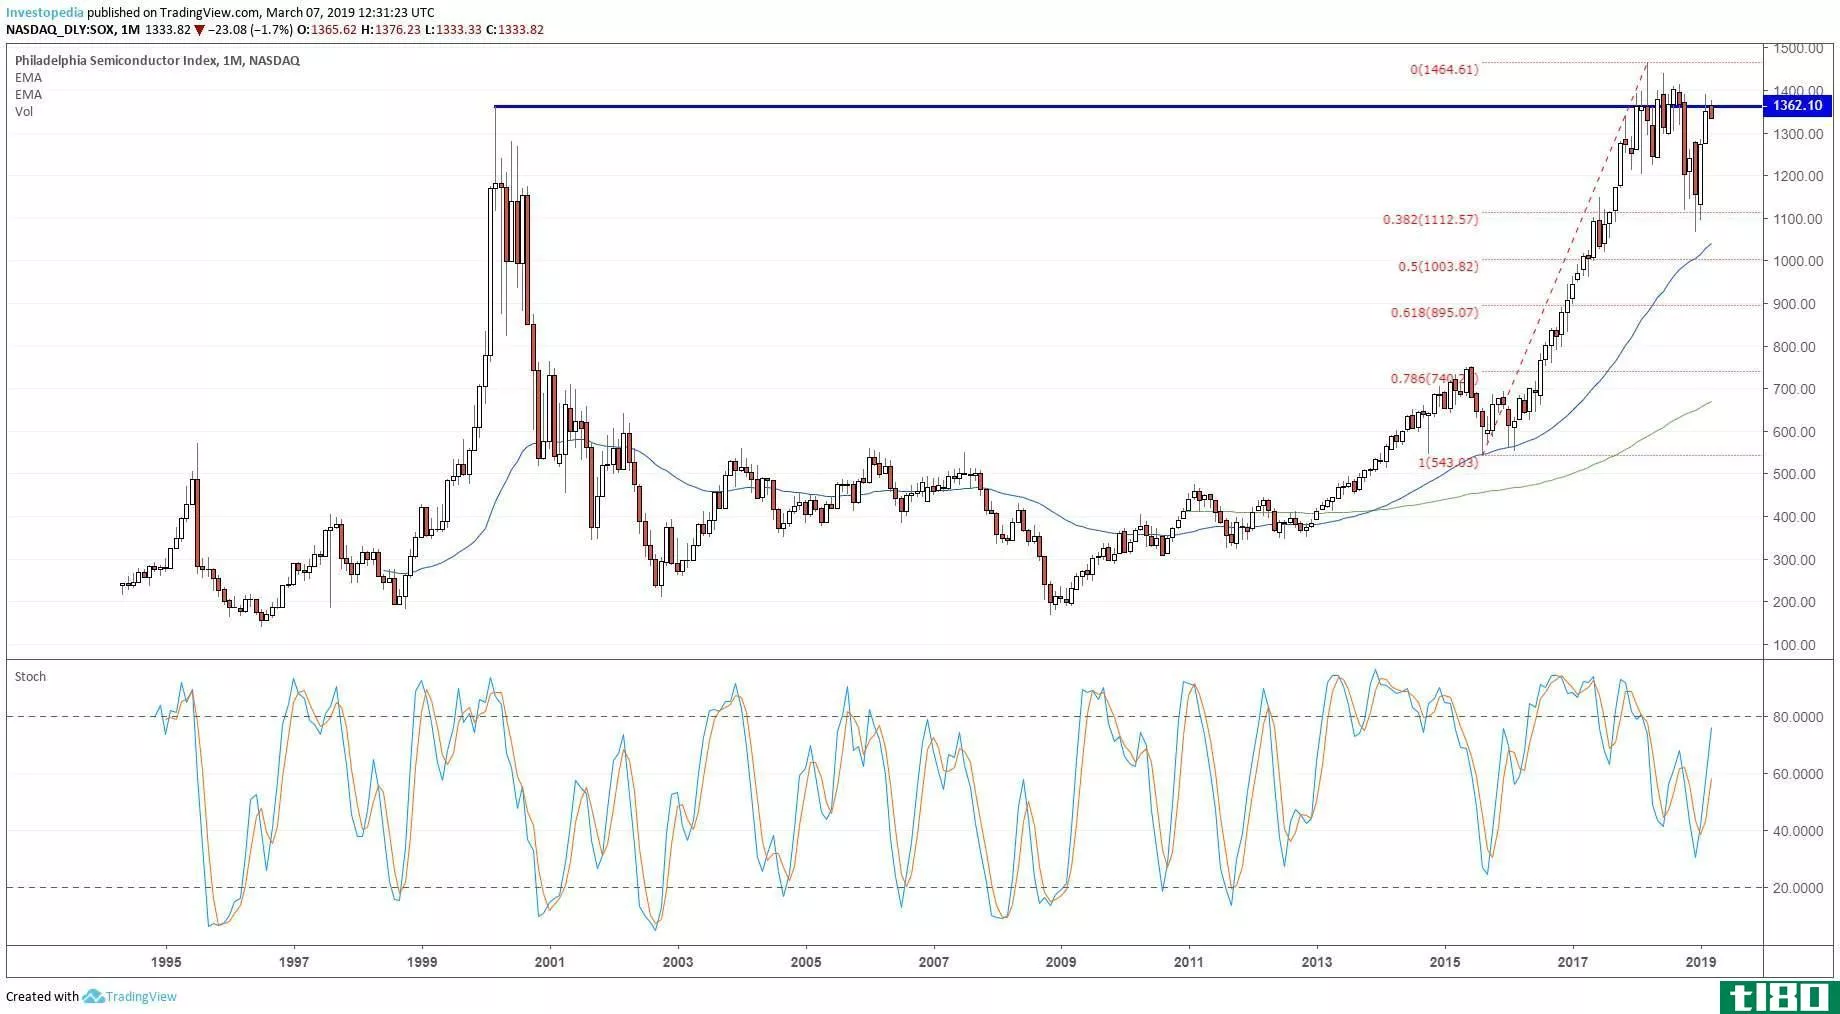 Long-term technical chart showing the performance of the PHLX Semiconductor Index (SOX)